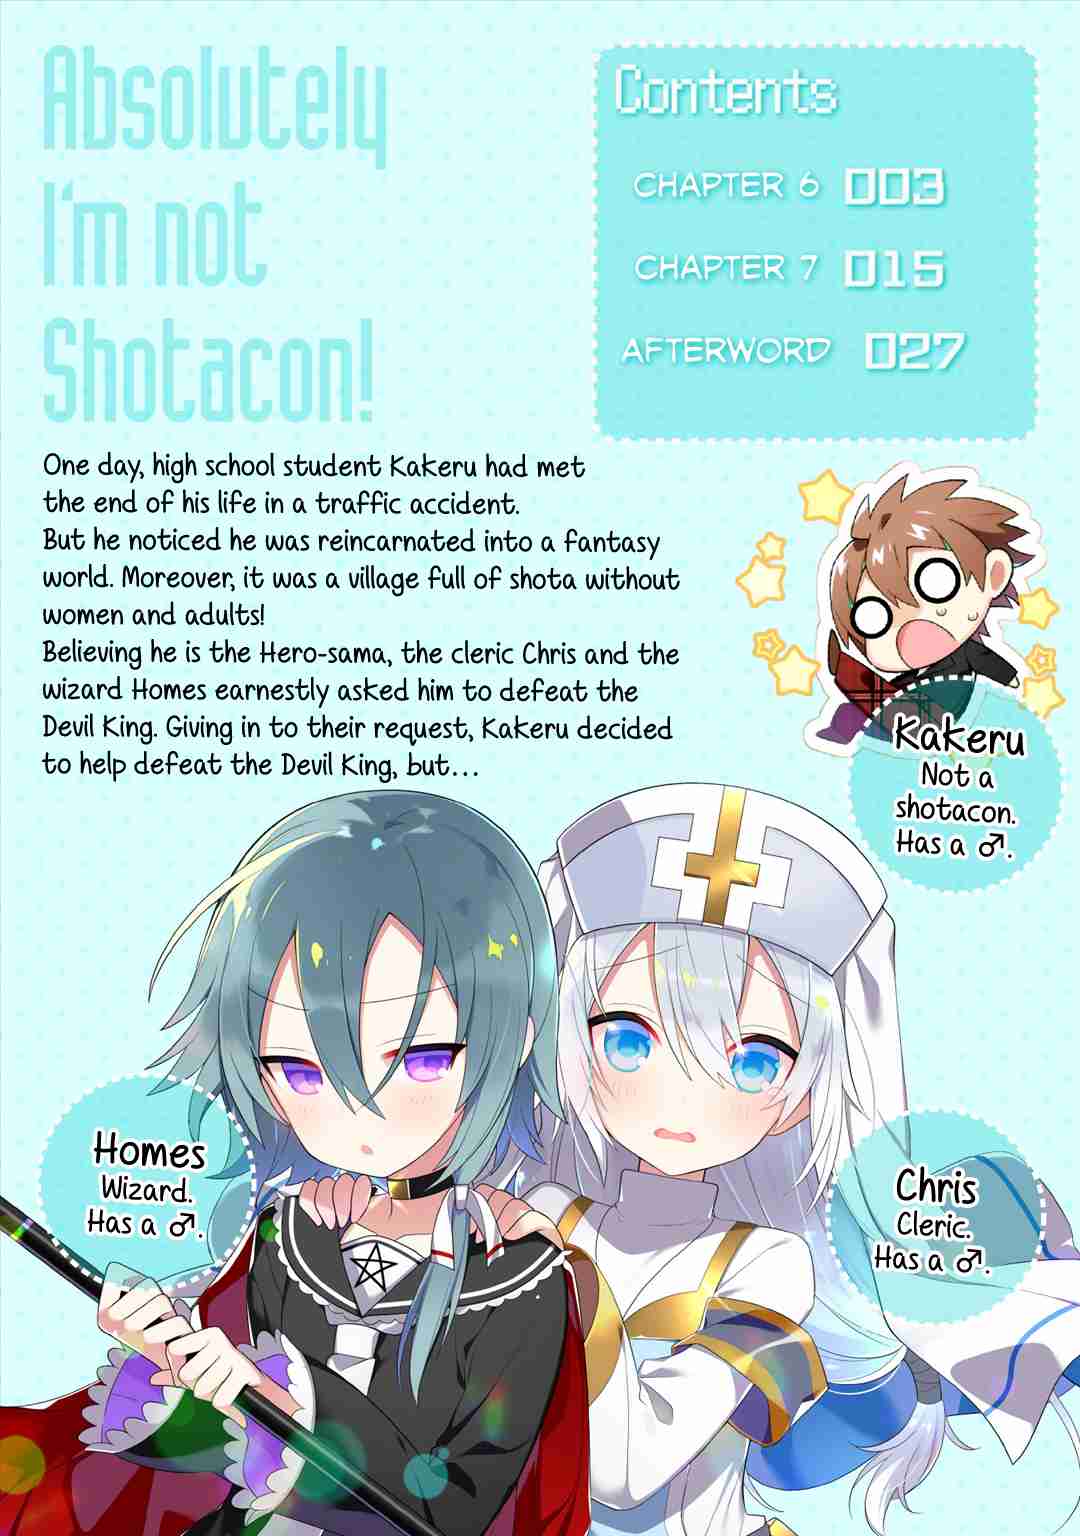 After Reincarnation, My Party Was Full Of Boys, But I'm Not A Shotacon! Ch. 6